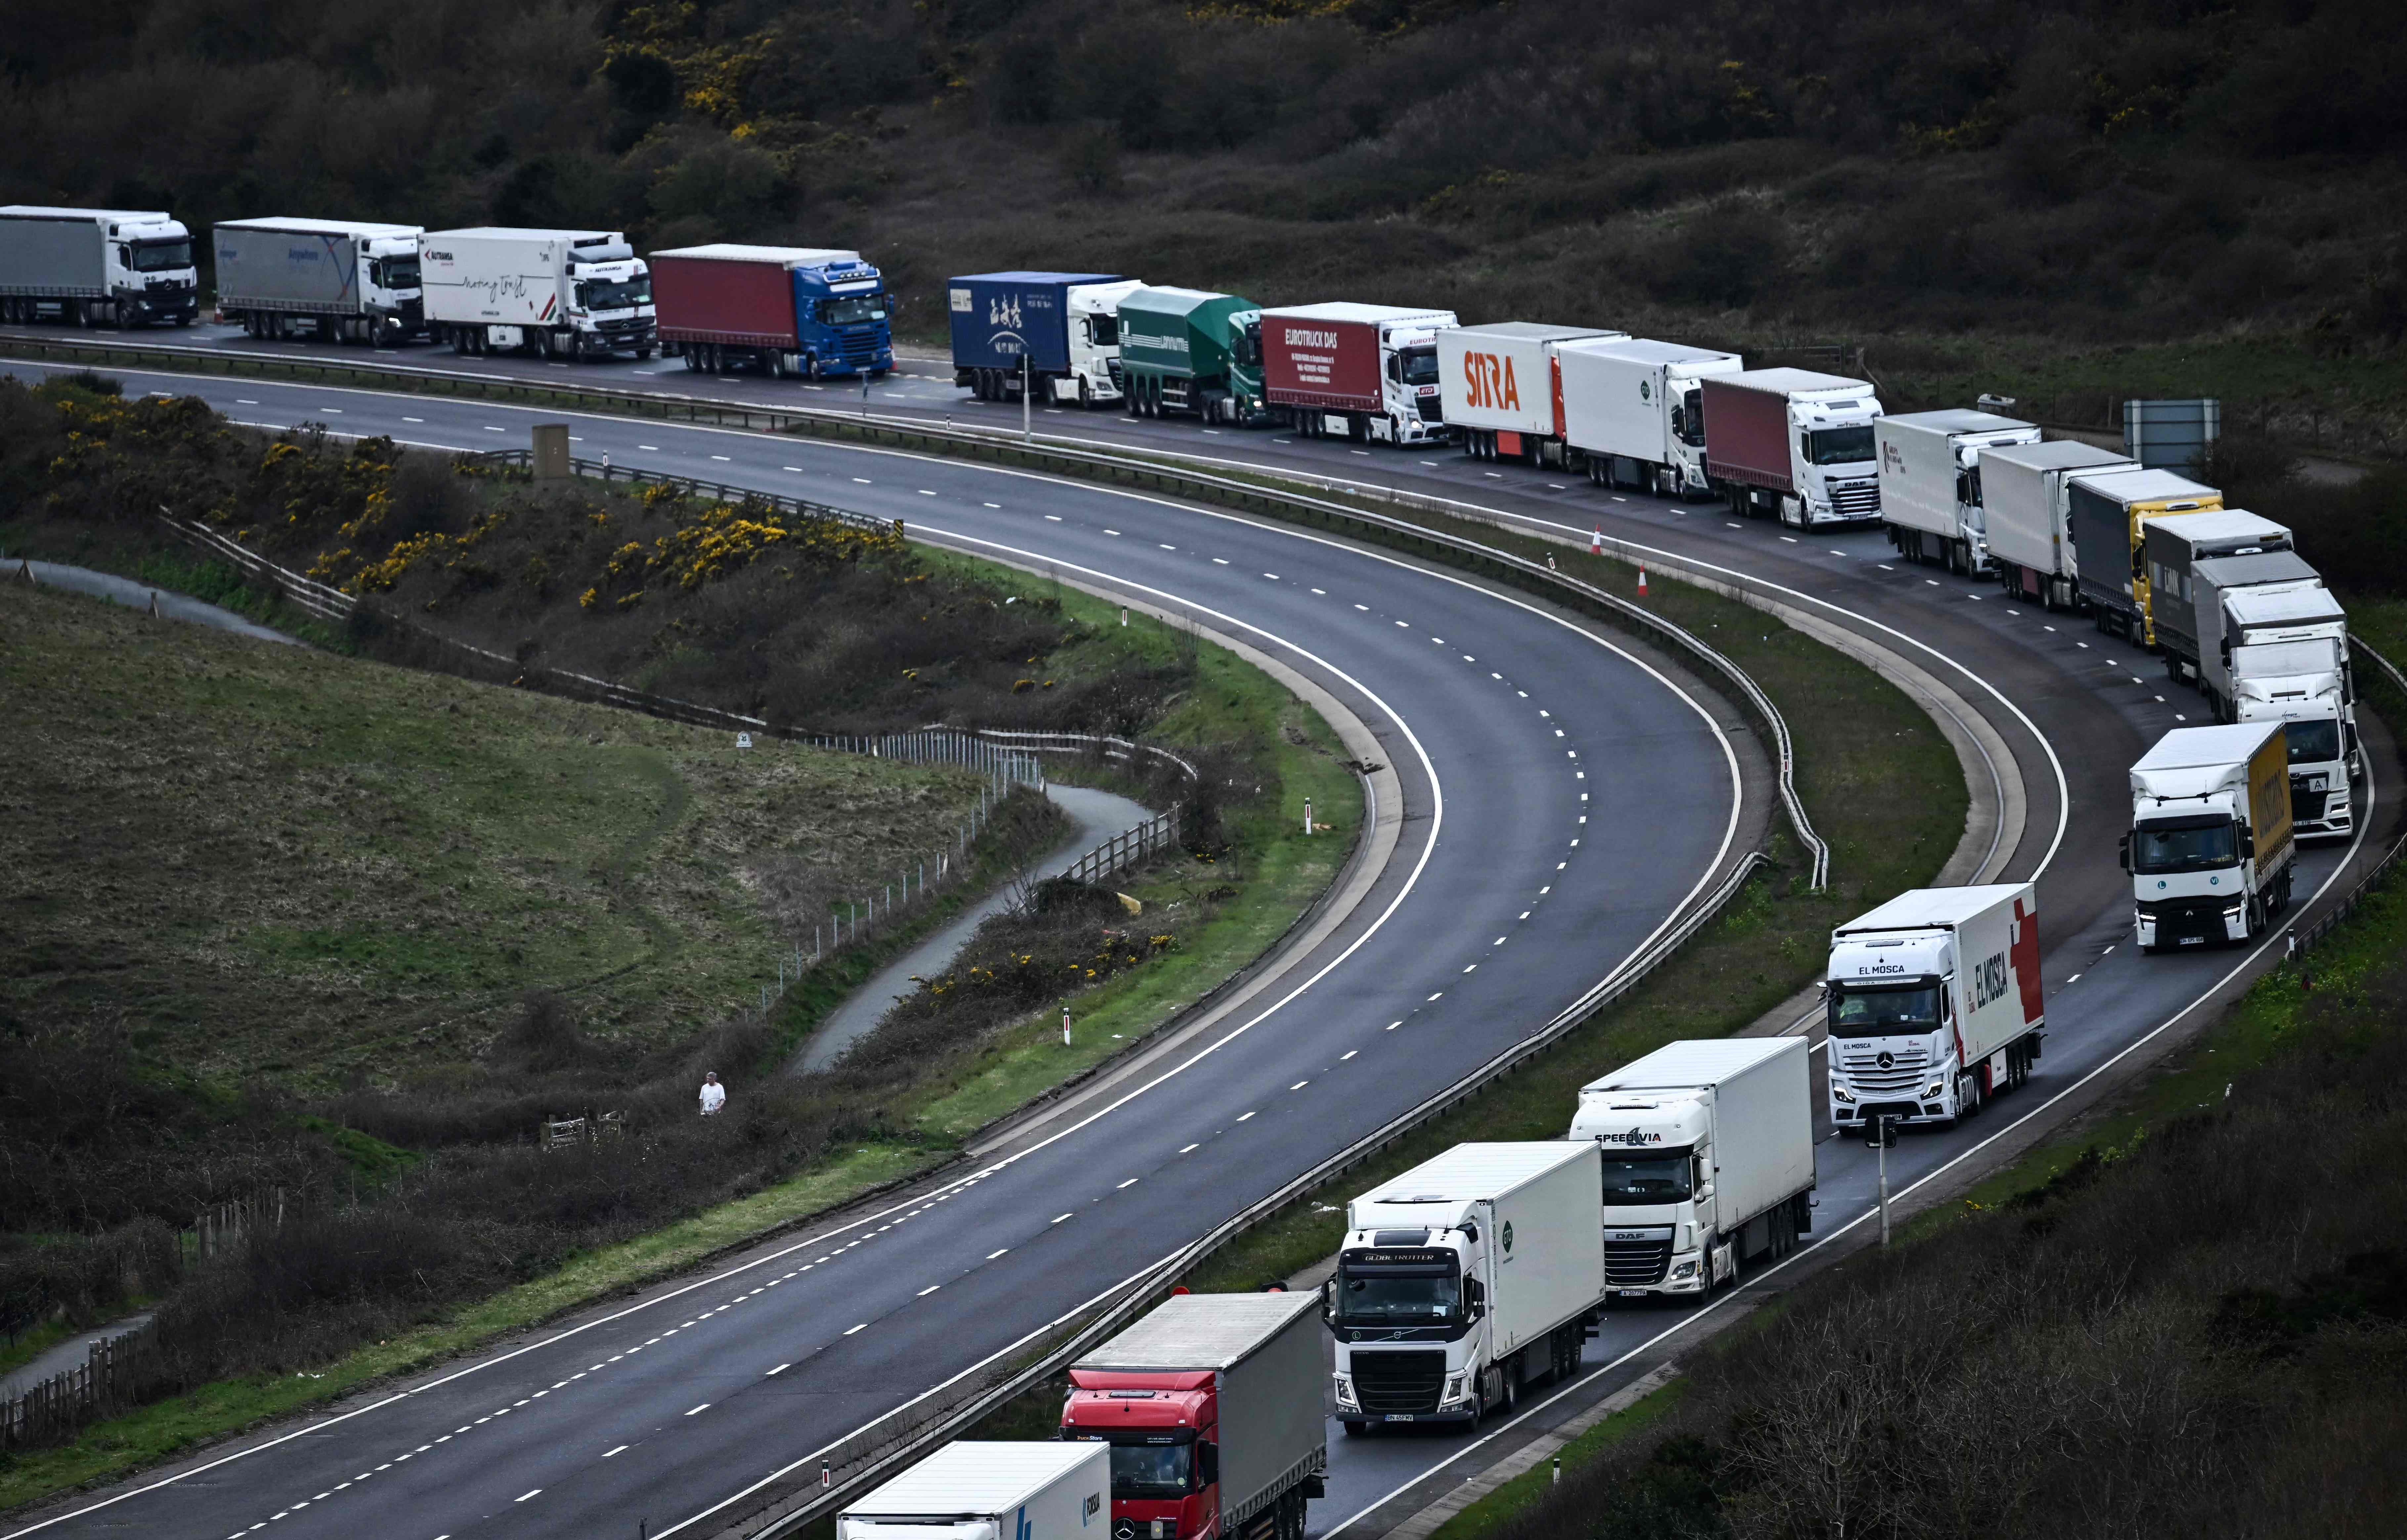 Freight lorries, HGVs (heavy goods vehicles) and cars queue on the A20 road towards the Port of Dover in April earlier this year